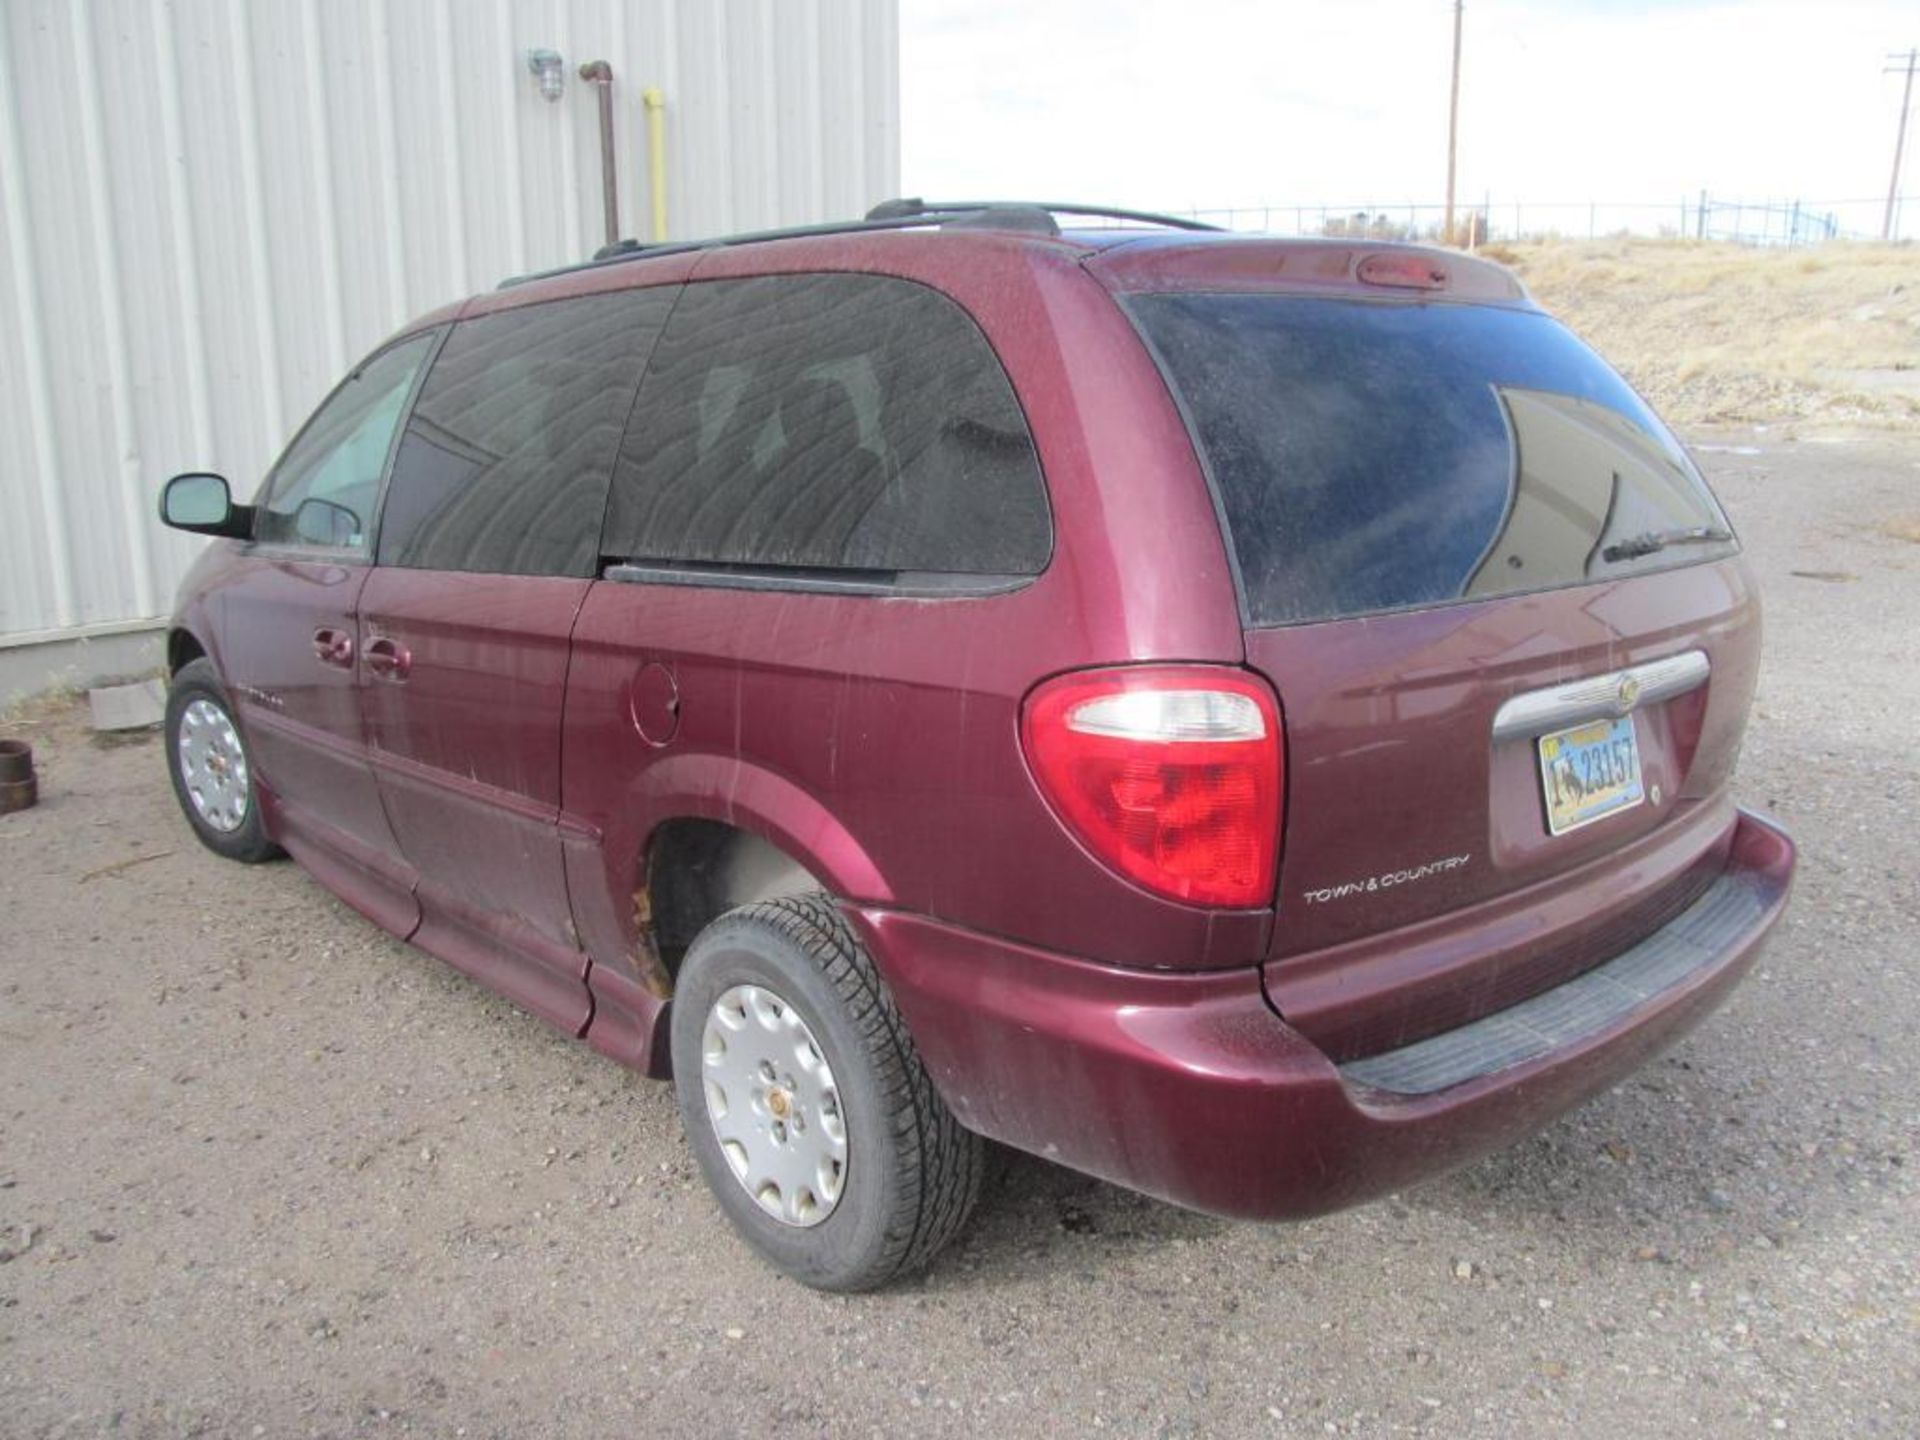 Chrysler Town & Country LX Full Mobility Kneeling Mini Van, VIN: 2C4GD44311R390145 (New 2001), with - Image 4 of 6